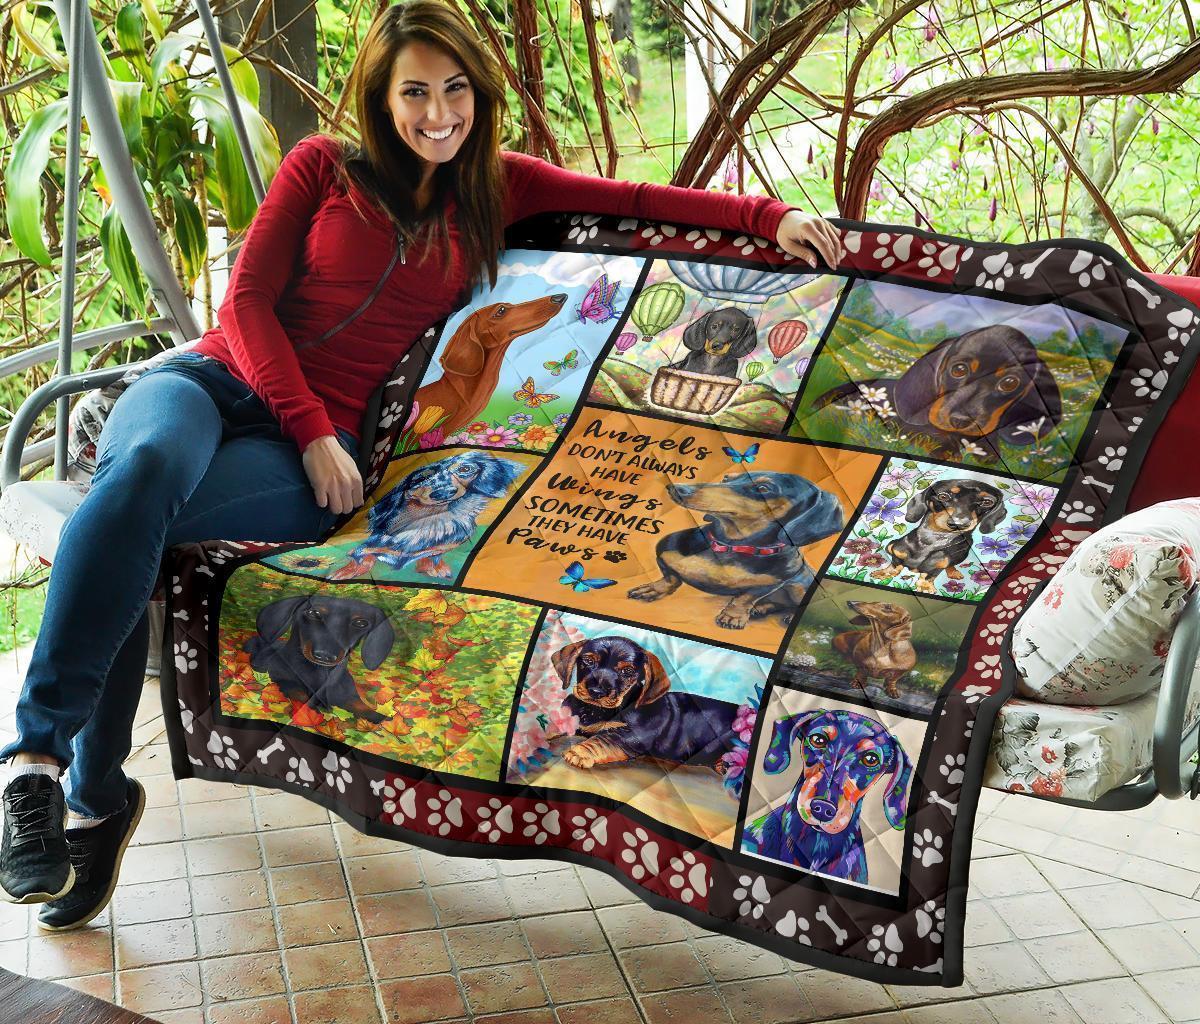 Dachshund Dog Quilt Blanket Angels Sometimes Have Paws-Gear Wanta